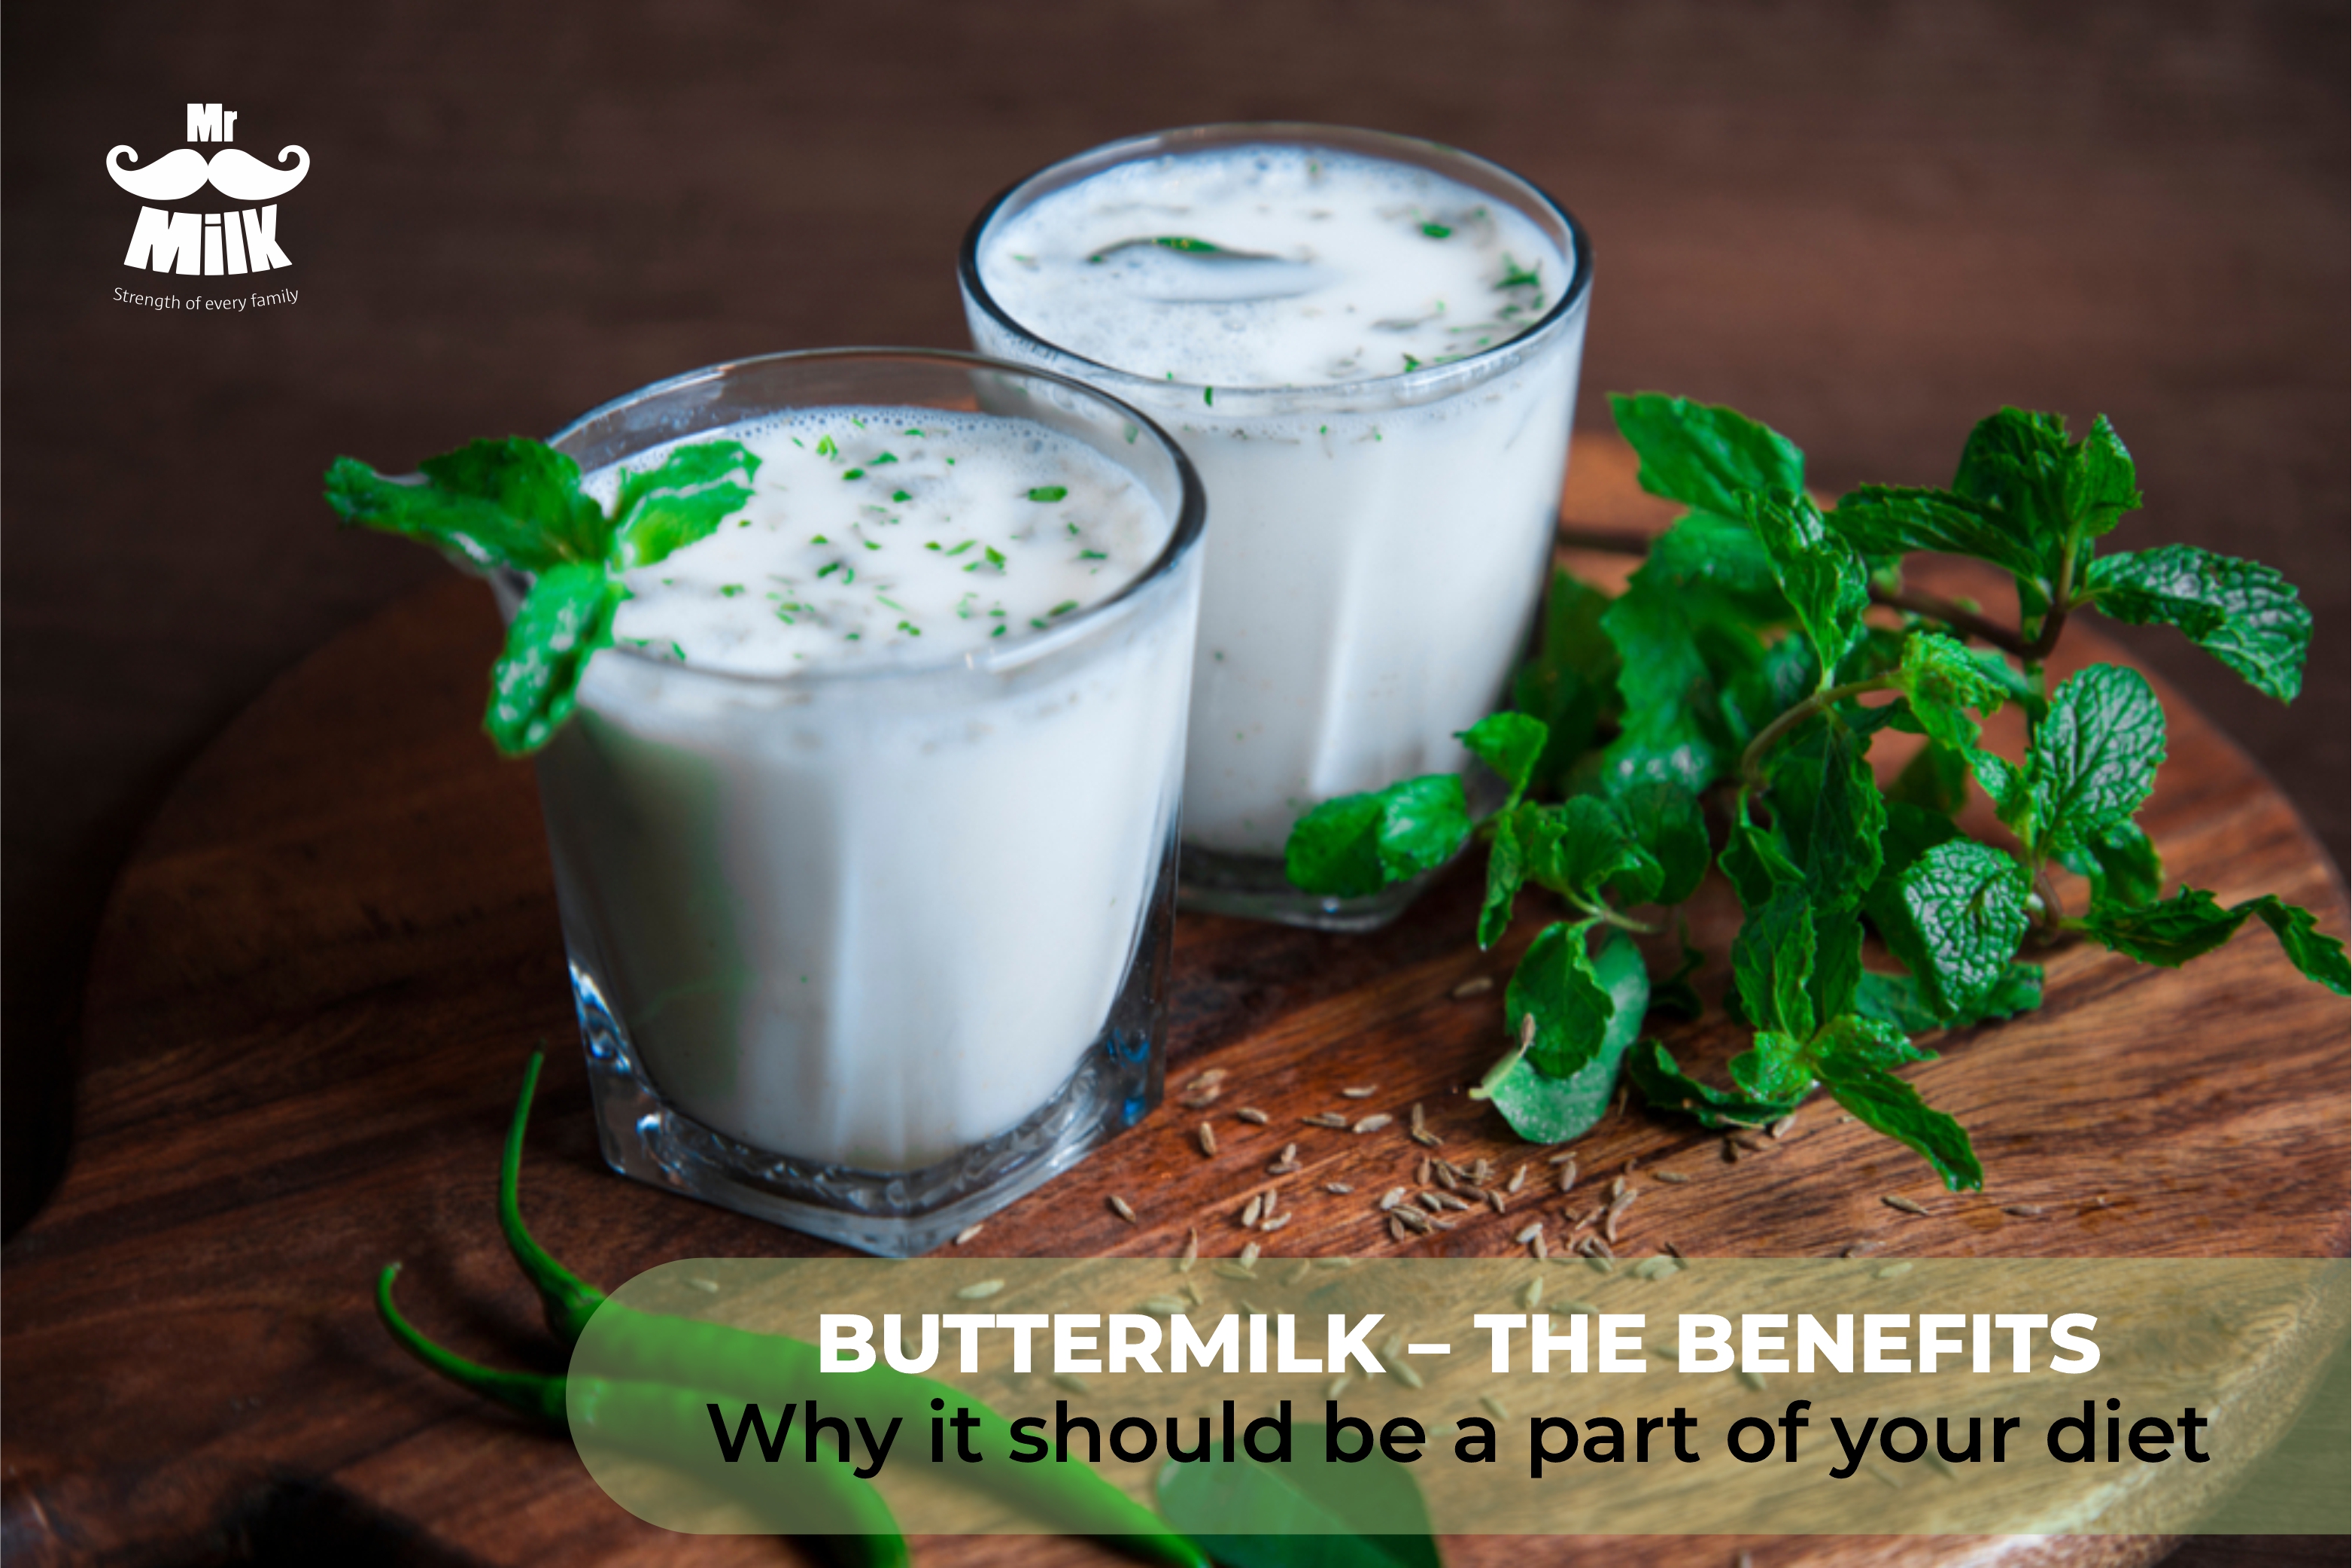 Buttermilk – The benefits and why it should be a part of your diet